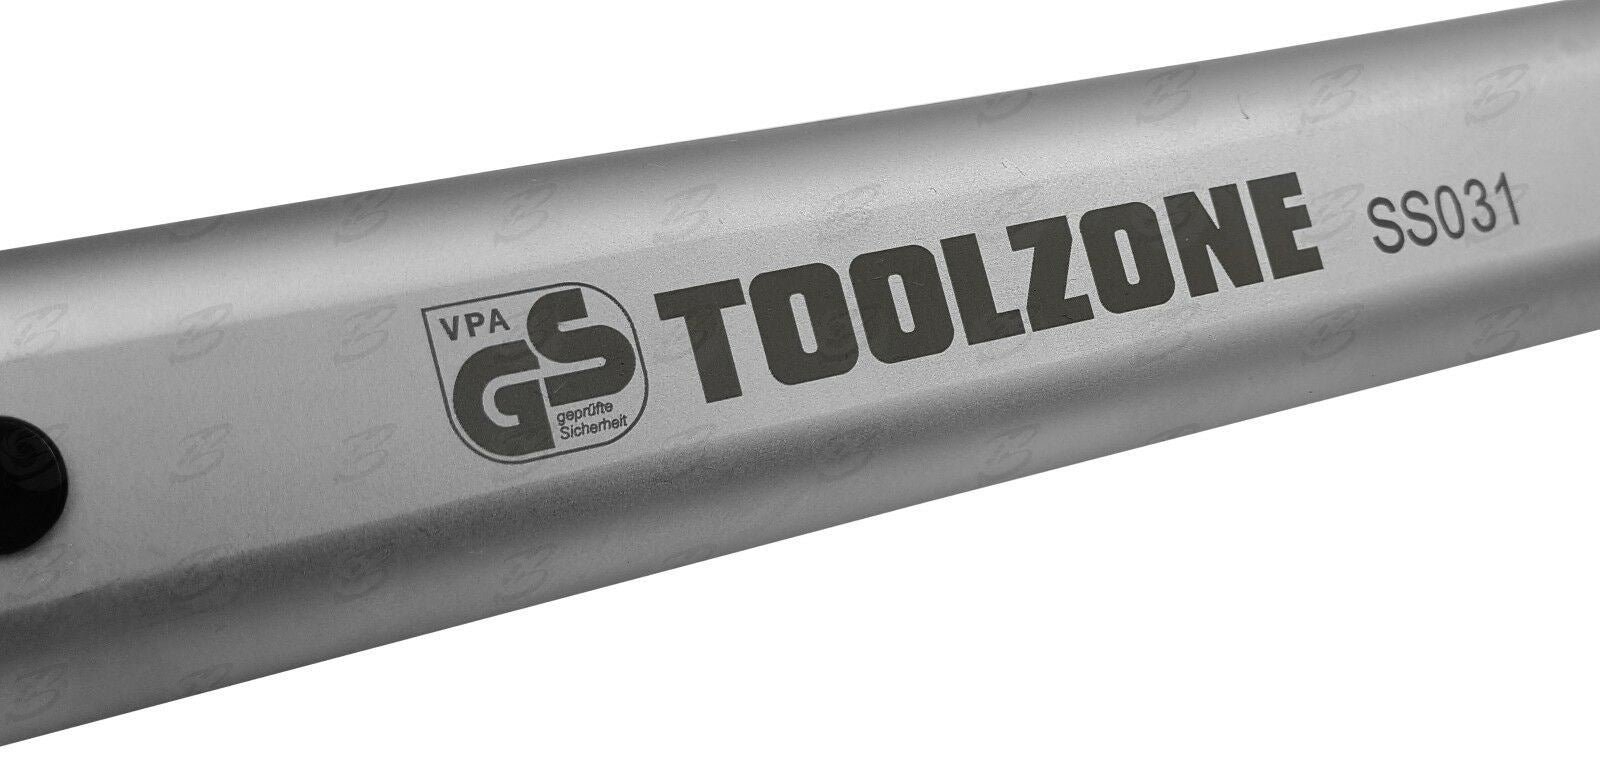 TOOLZONE 1/2" DRIVE CALIBRATED TORQUE WRENCH 70Nm - 350Nm